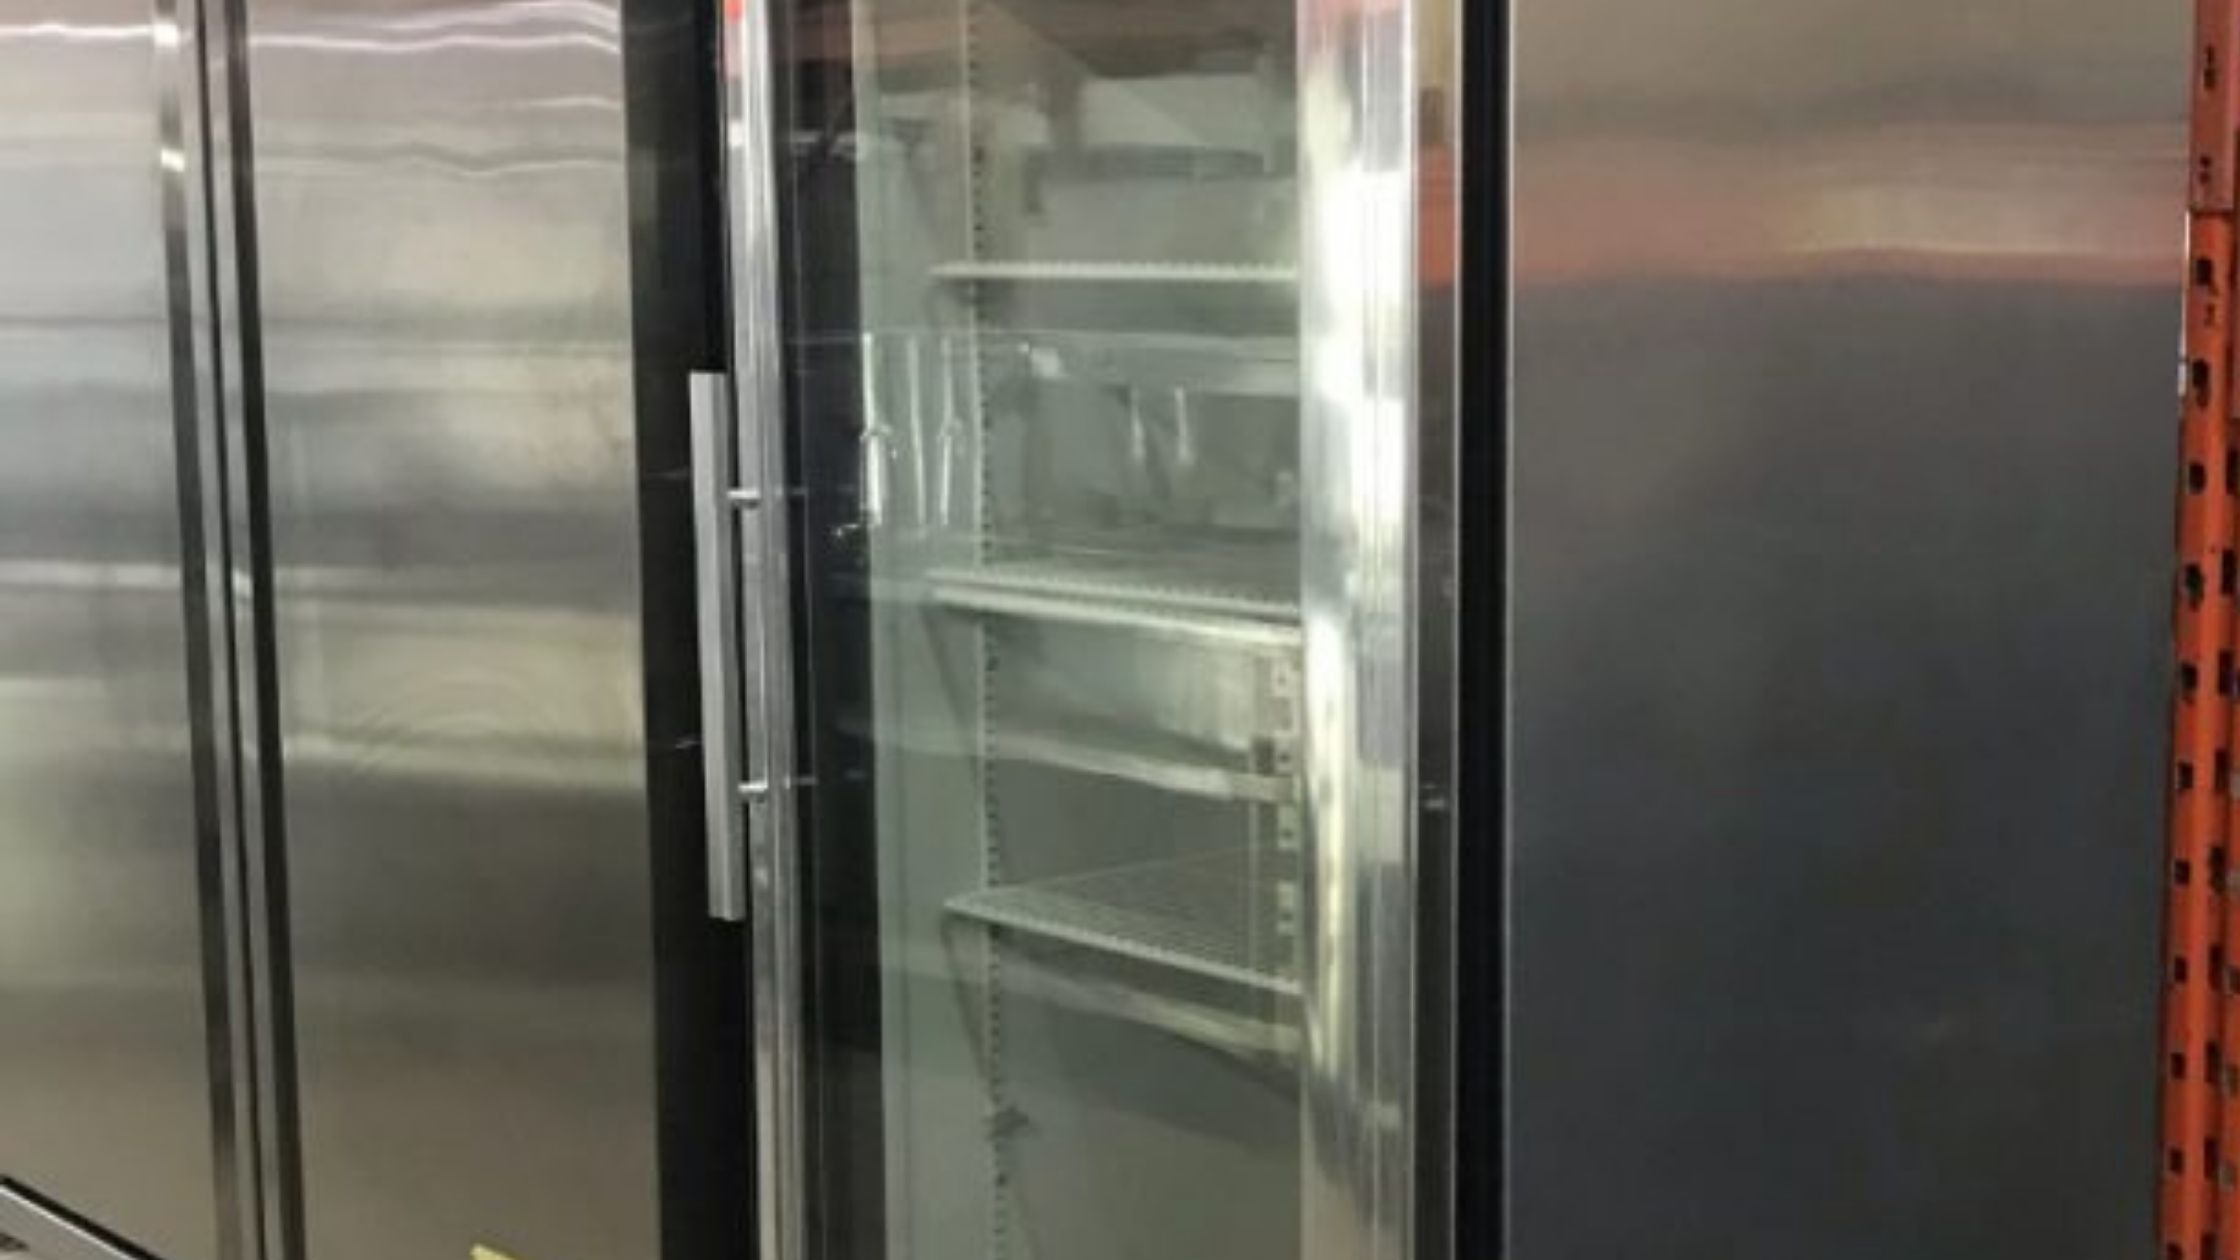 Tips for keeping your commercial refrigerator organized